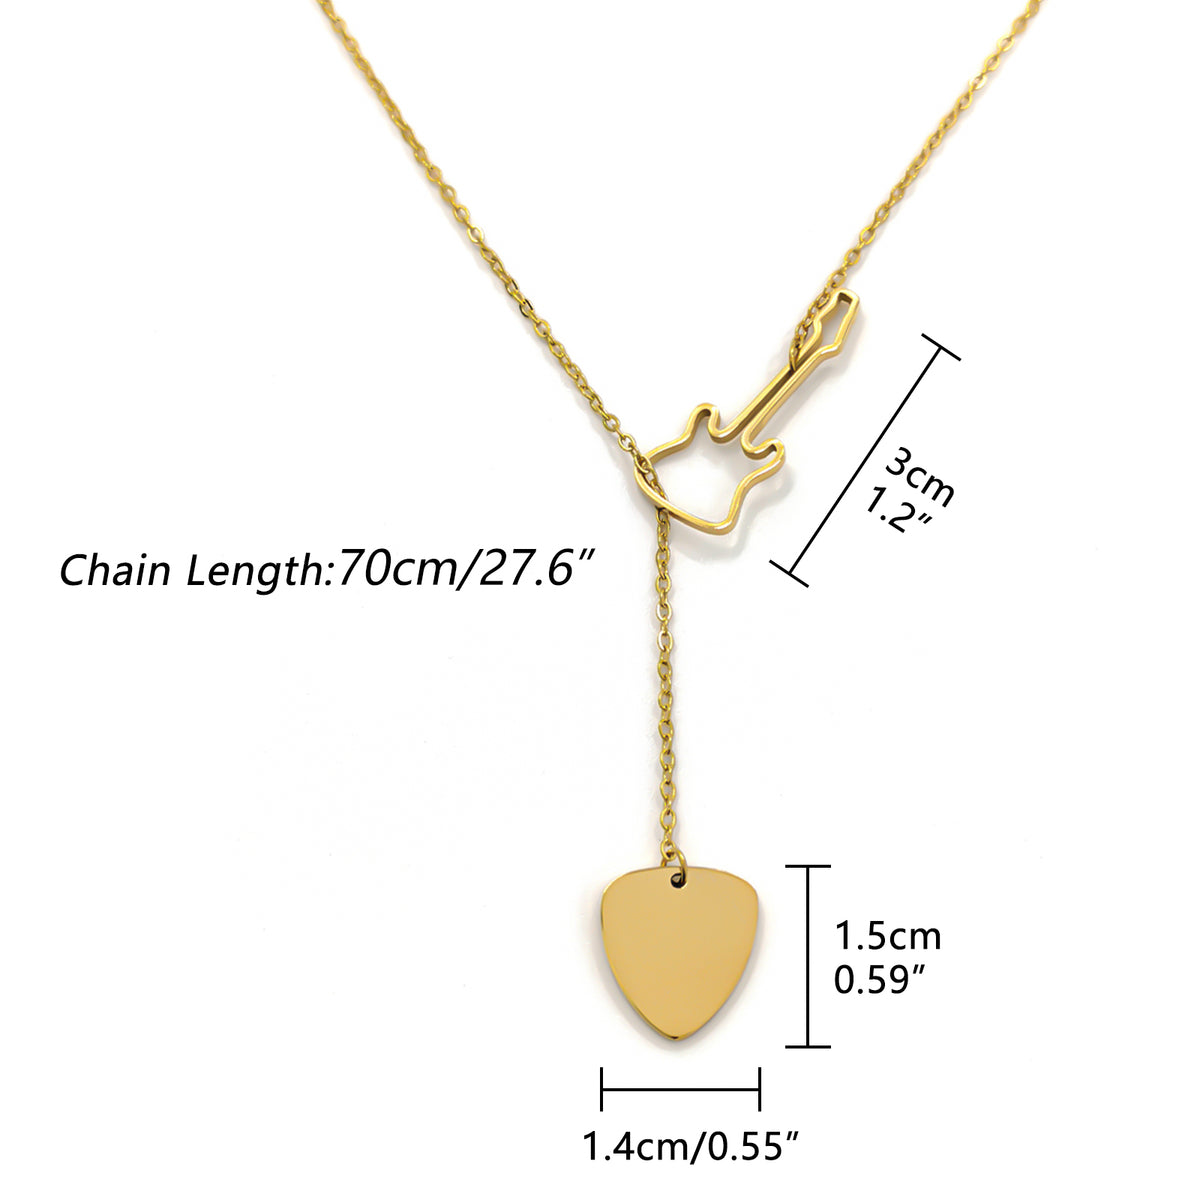 Musiin Guitar Necklace 18K Gold Stainless Steel, Adjustable Y-shaped lock sleeve Necklace for Women(Gold)